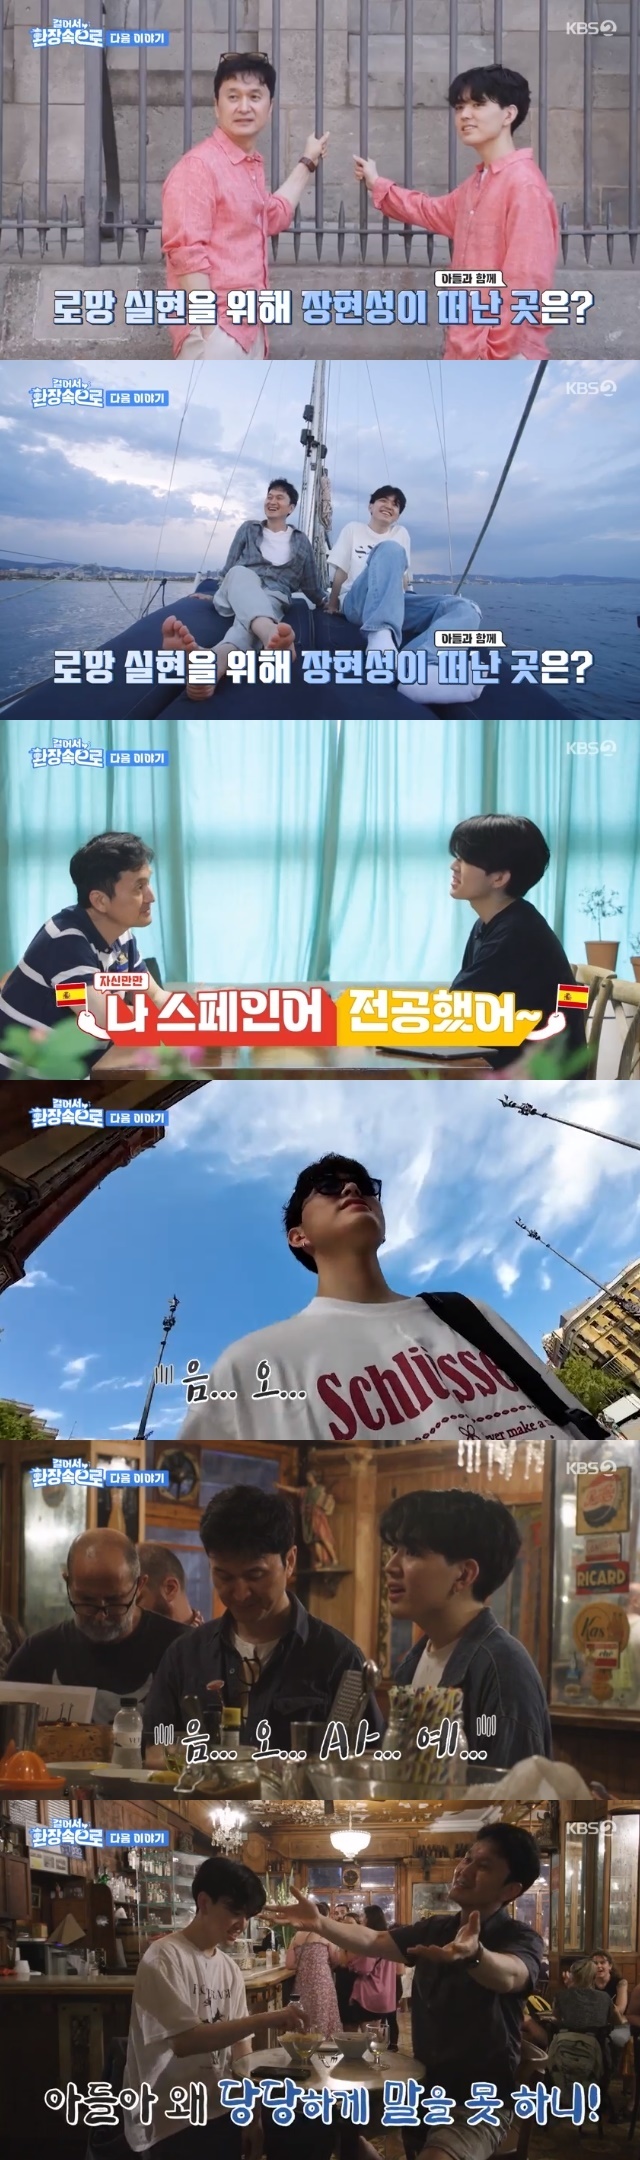 Actor Jang Hyun-sung left Song Joong-kis resemblance to a hot-tempered son and Travel.KBS 2TV on foot into a frenzy (hereinafter referred to as vulgarization), which was broadcast on August 13, revealed that Jang Hyun-sung and his son Jang Joon-woo left the travel to Barcelona, Spain.In the trailer, Jang Hyun-sung, who realized the romance, appeared.Many fathers dreams are to travel with their son, said Jang Joon-woo, the eldest son, to travel to Barcelona, where art and history are alive.In particular, Jang Joon-woo expressed confidence in the language before leaving Travel, saying, My major was Spanish.Actually Jang Joon-woo graduated from Daeil Foreign Language High School with a degree in Spanish.However, there was a reversal afterwards. When Jang Joon-woo looked at the menu plate and ordered, he could not keep his mouth shut by repeating um oh yes.Instead, Jang Hyun-sung shouted Spanish and communicated with locals in Spain. It is worth noting what kind of travel these rich people will show.